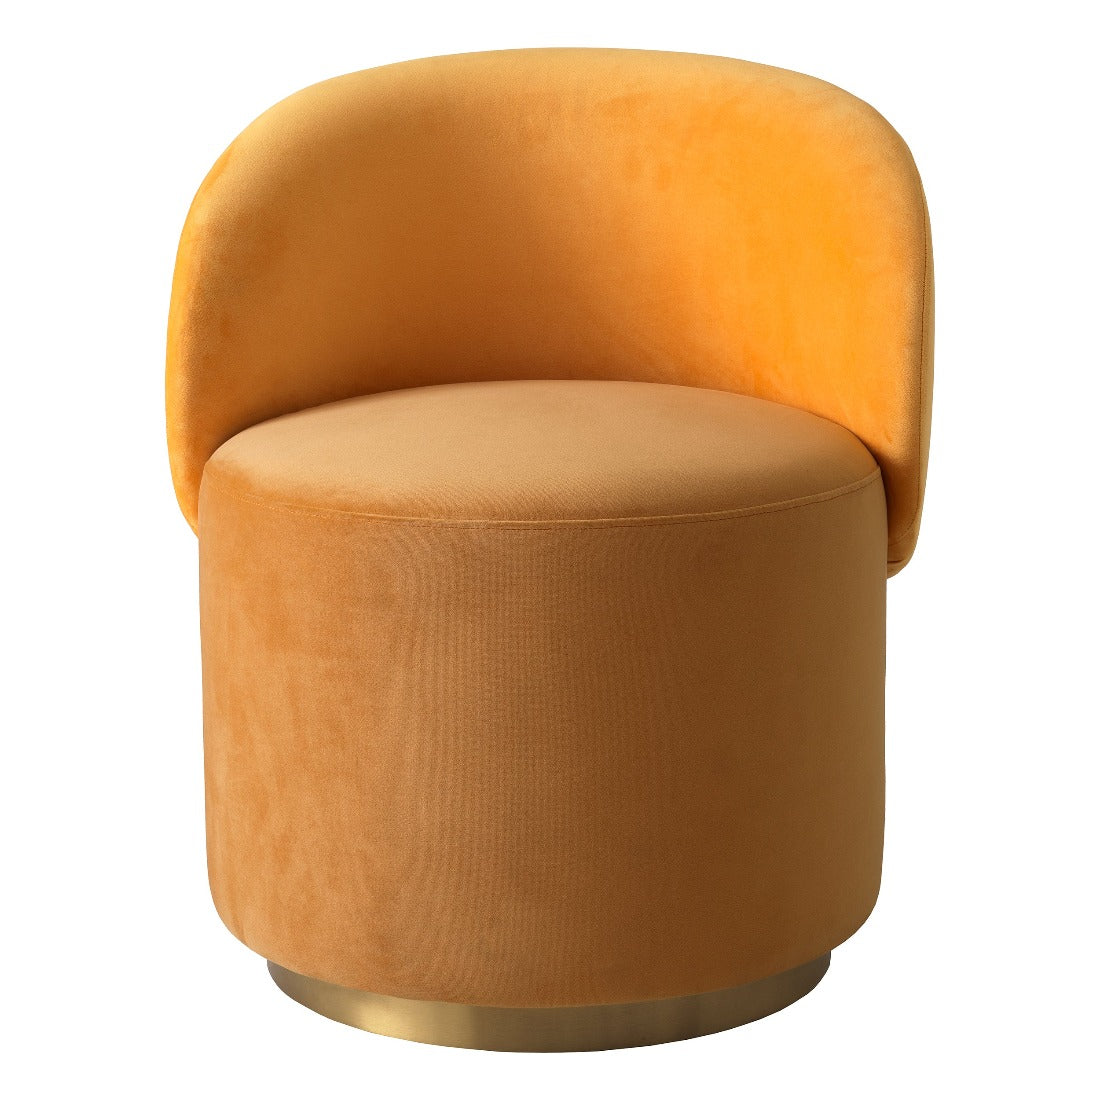 Low swivel dining chair Eichholtz Greer yellow